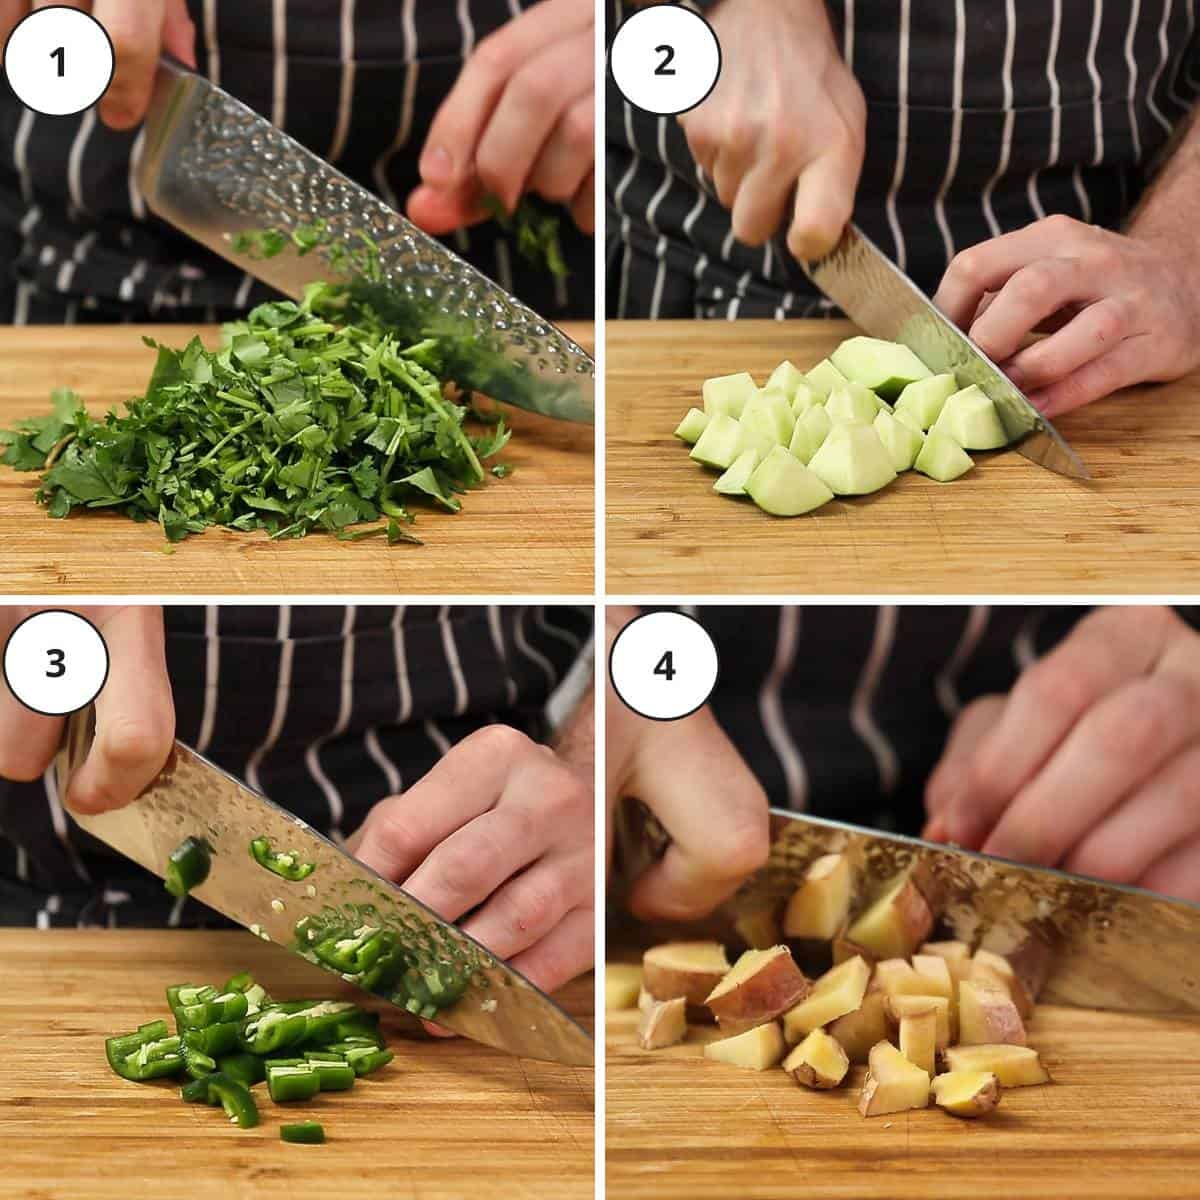 Picture steps to make cilantro mint chutney.